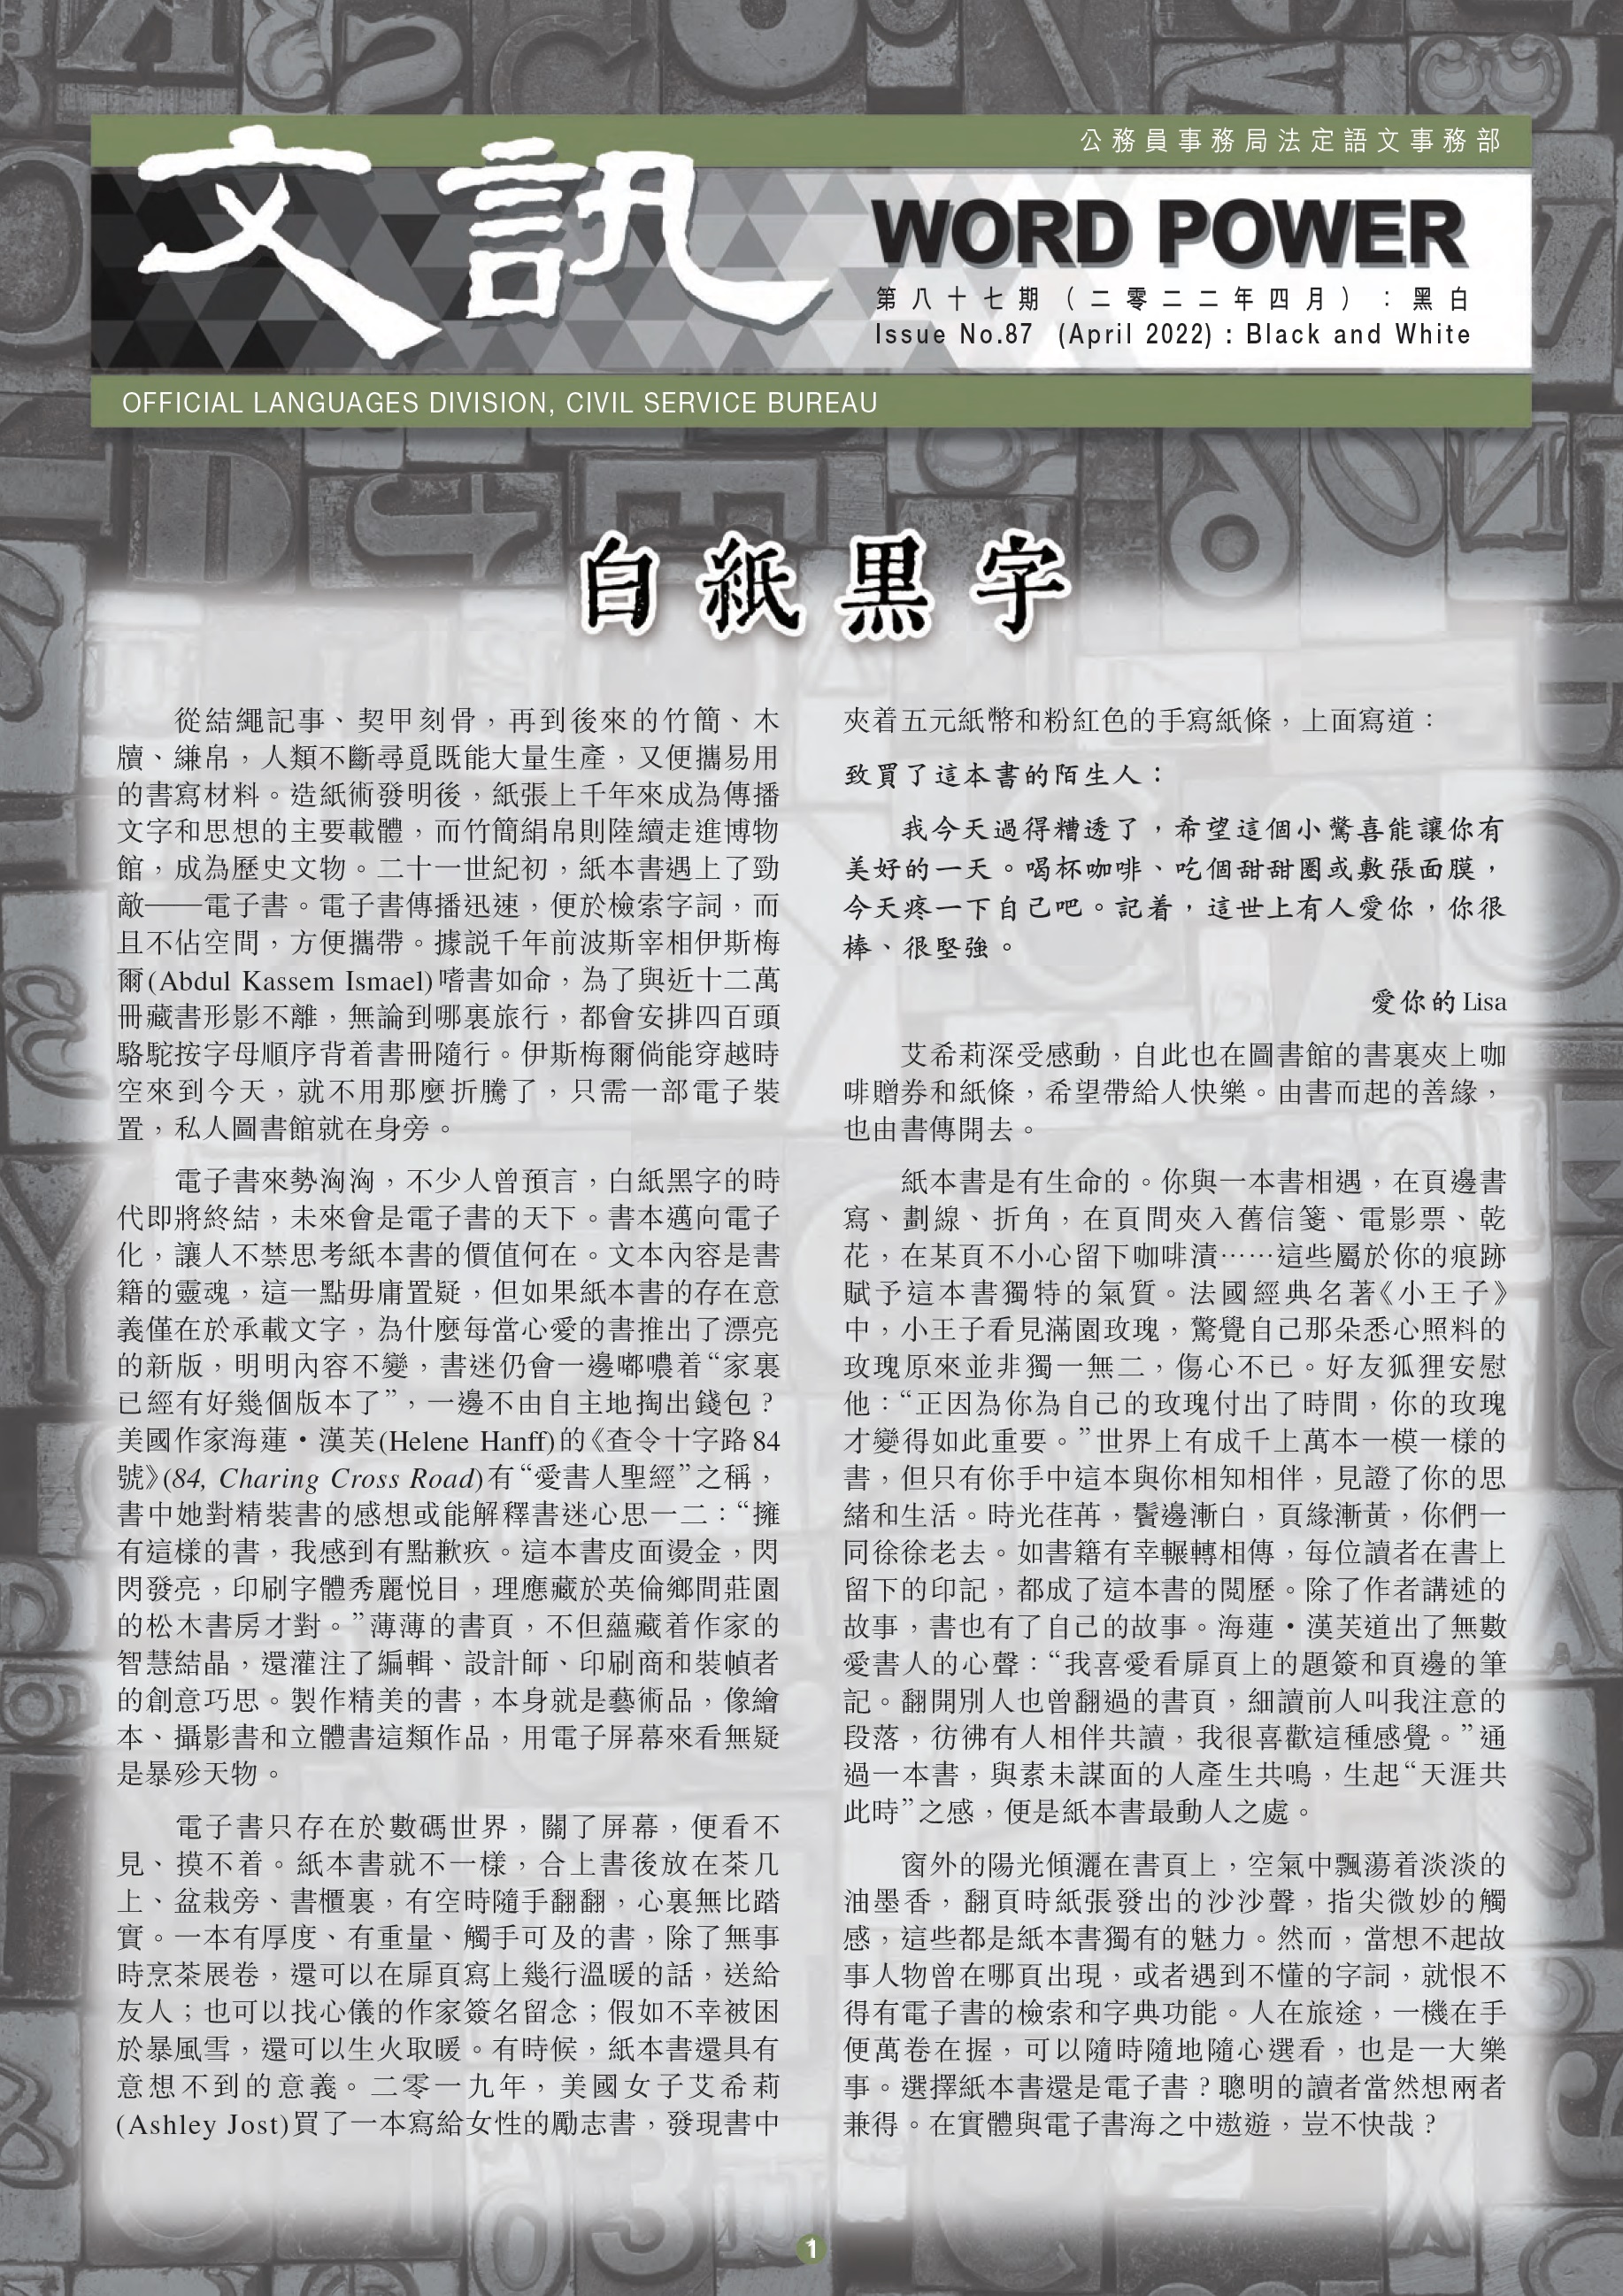 87th issue of Word Power